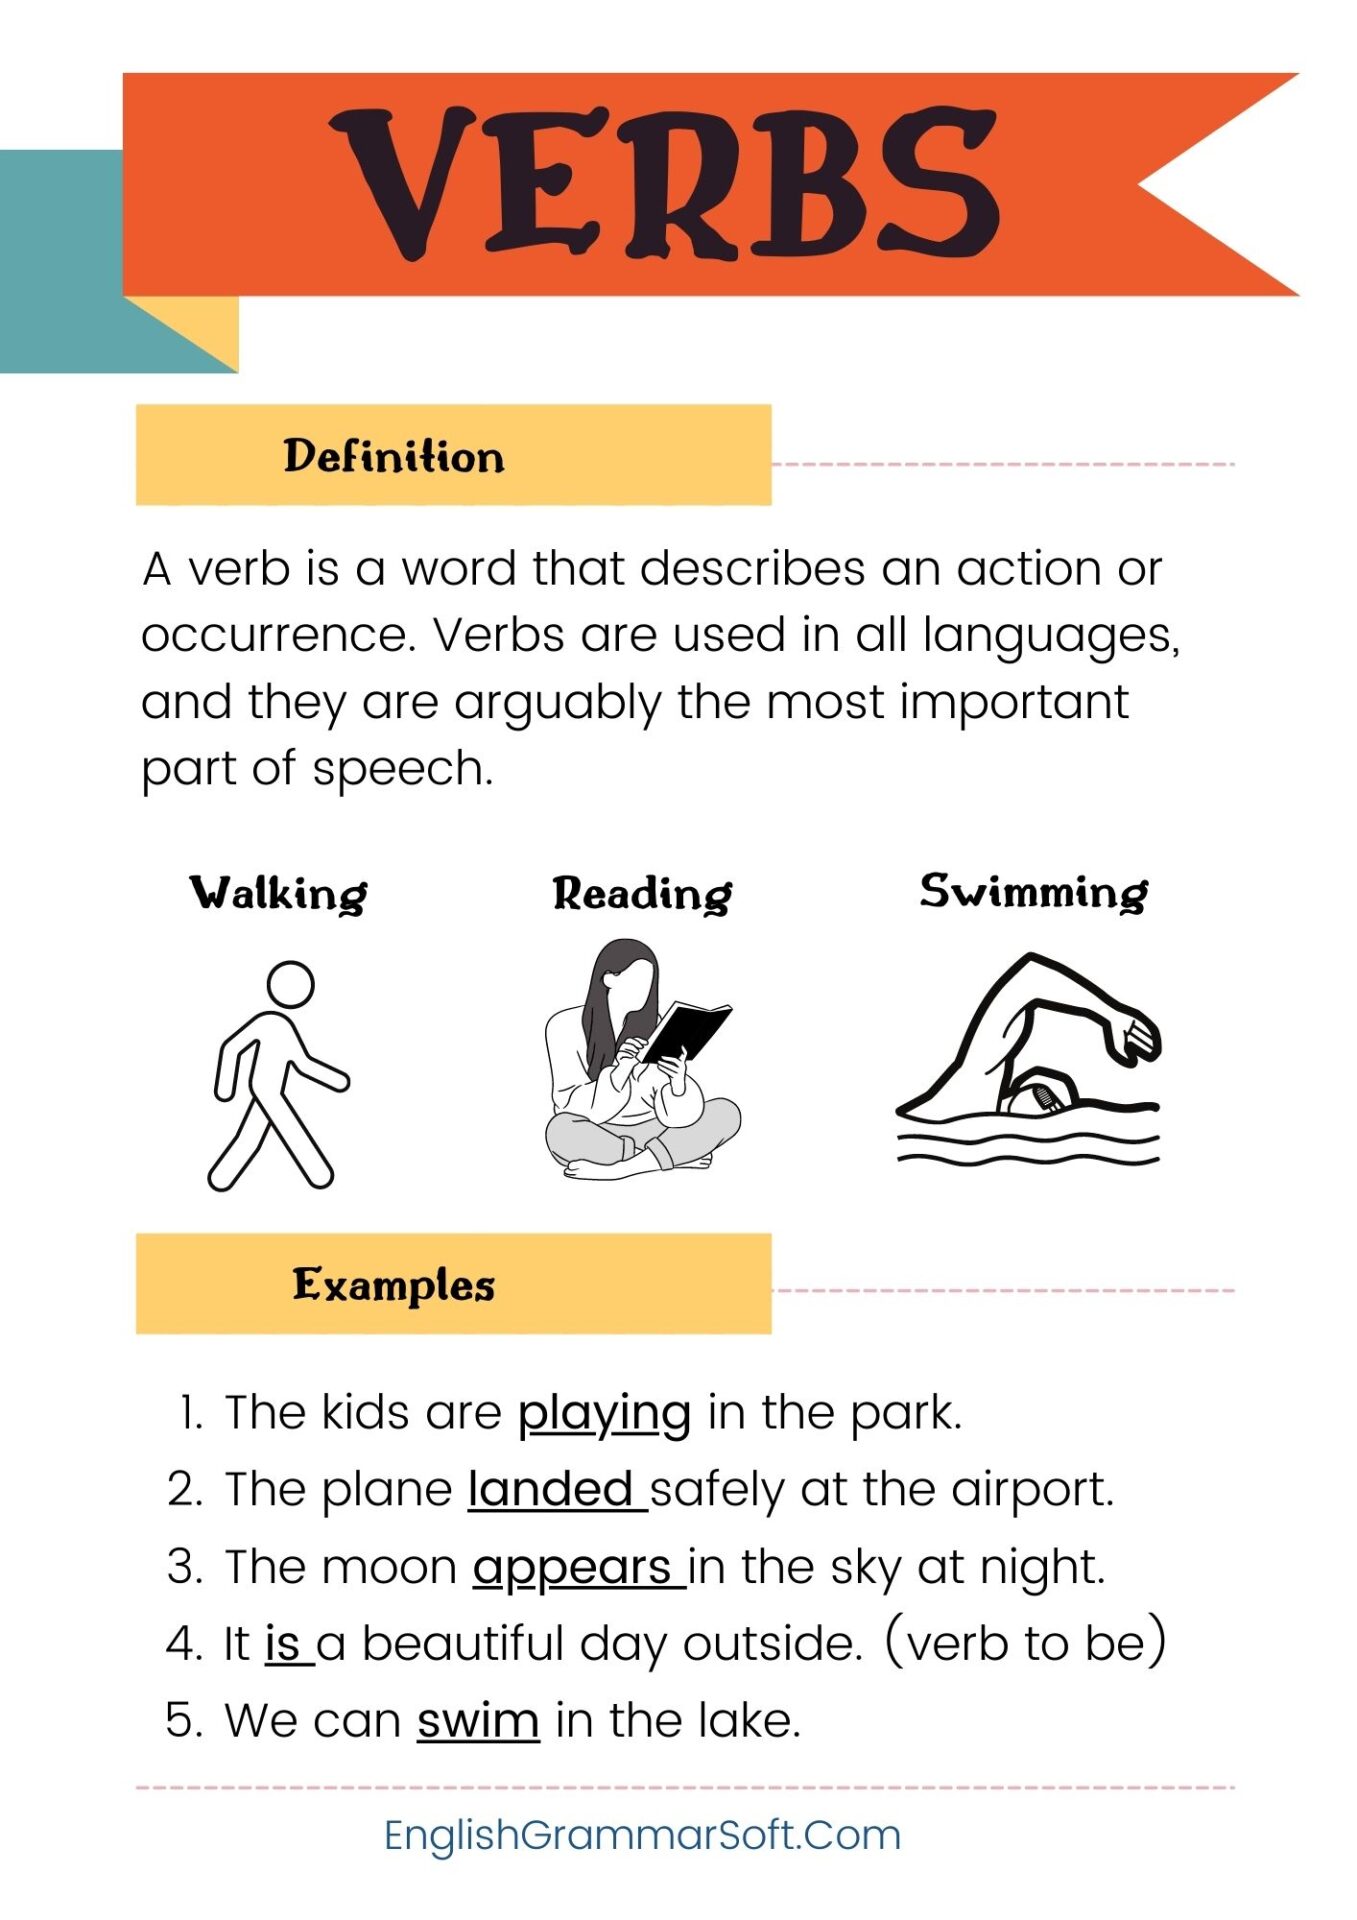 Verbs: Free Parts of Speech Posters